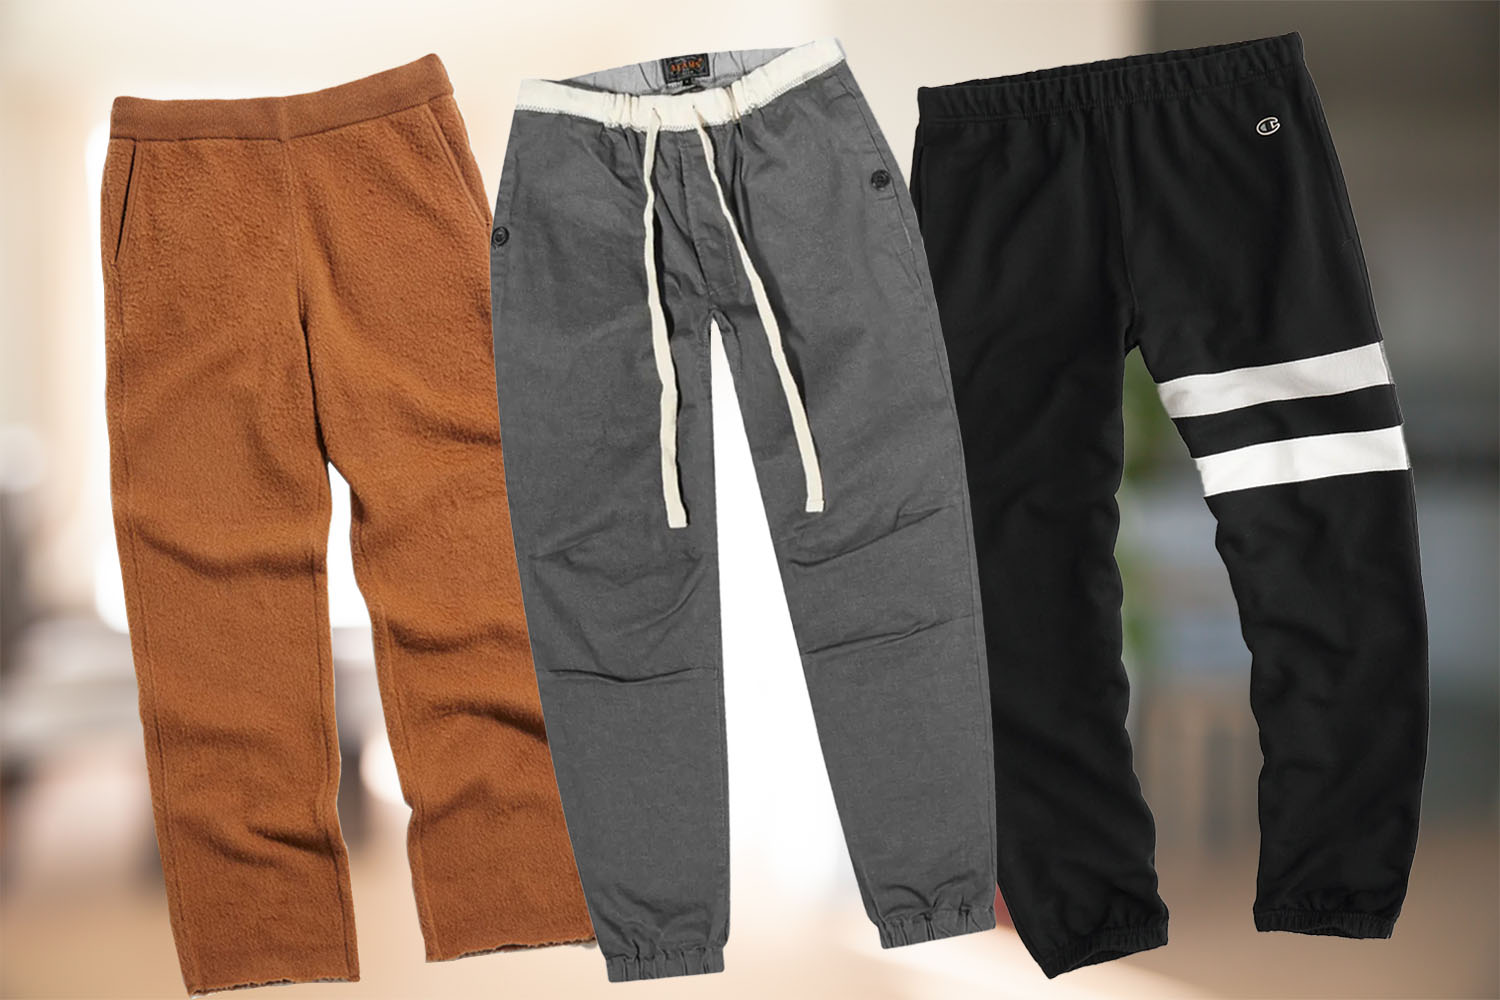 Tested: The 9 Very Best Sweatpants For Men